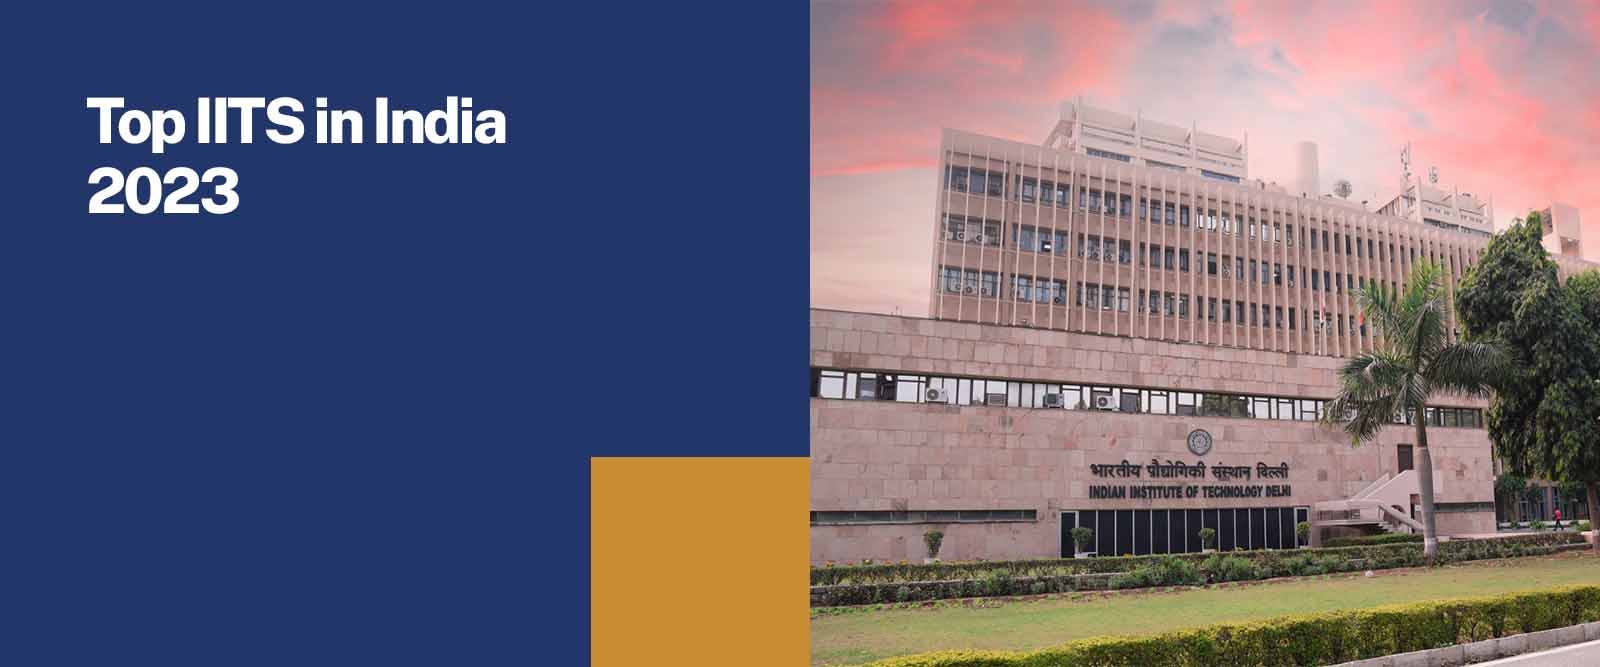 Top IITs in India 2023